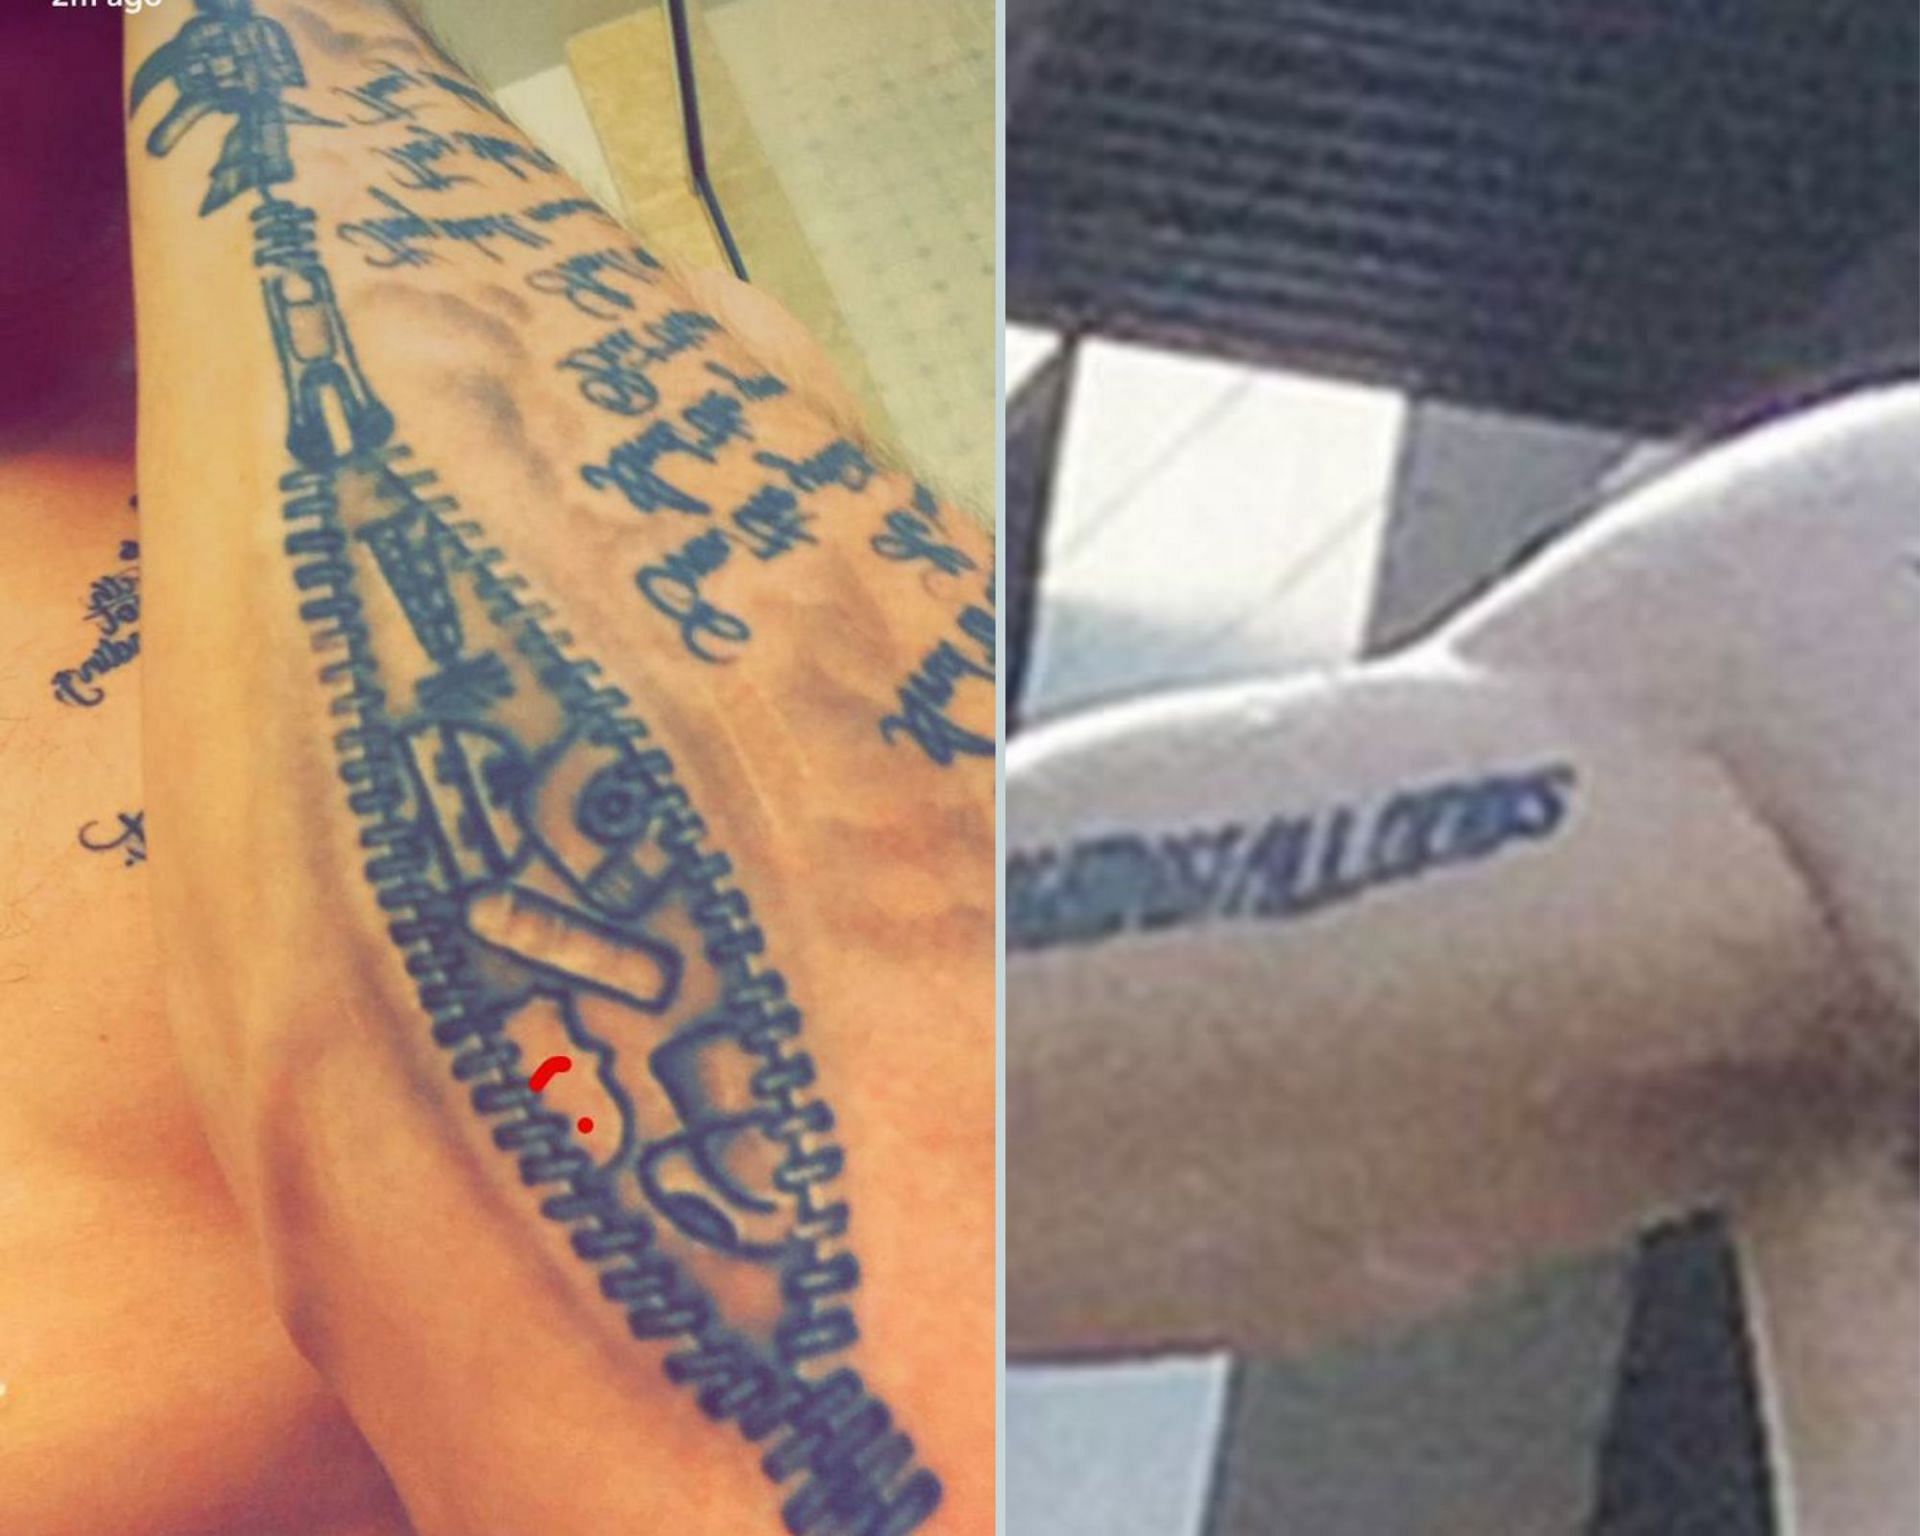 Manziel&#039;s tattoos depict deep spiritual and personal meanings